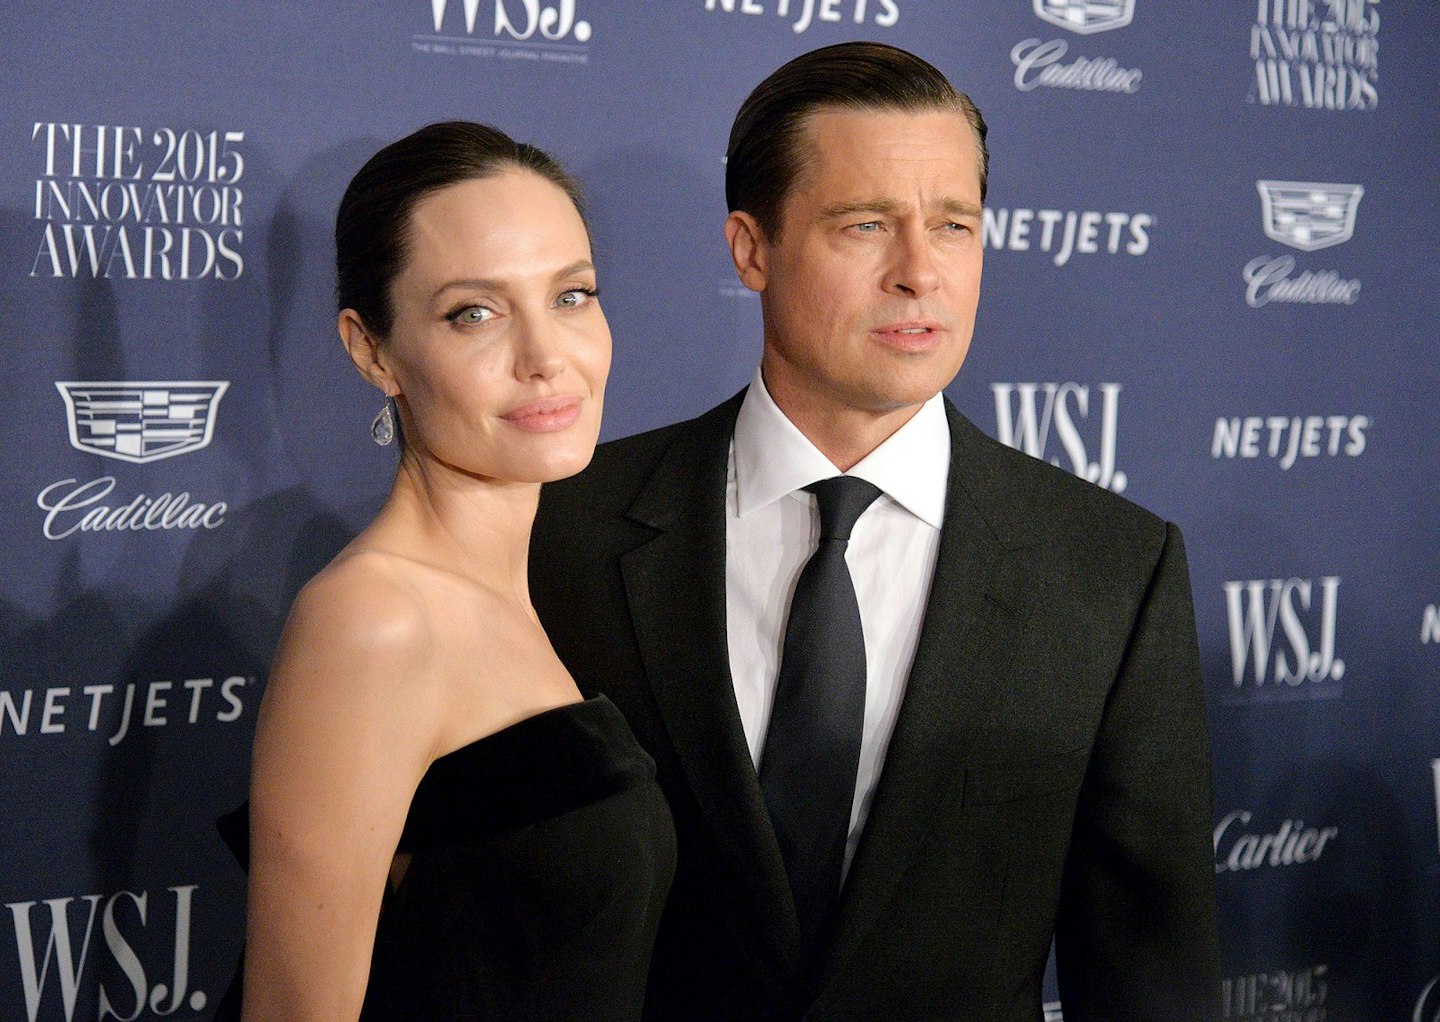 Why Are Angelina Jolie and Brad Pitt Still Legally Married?